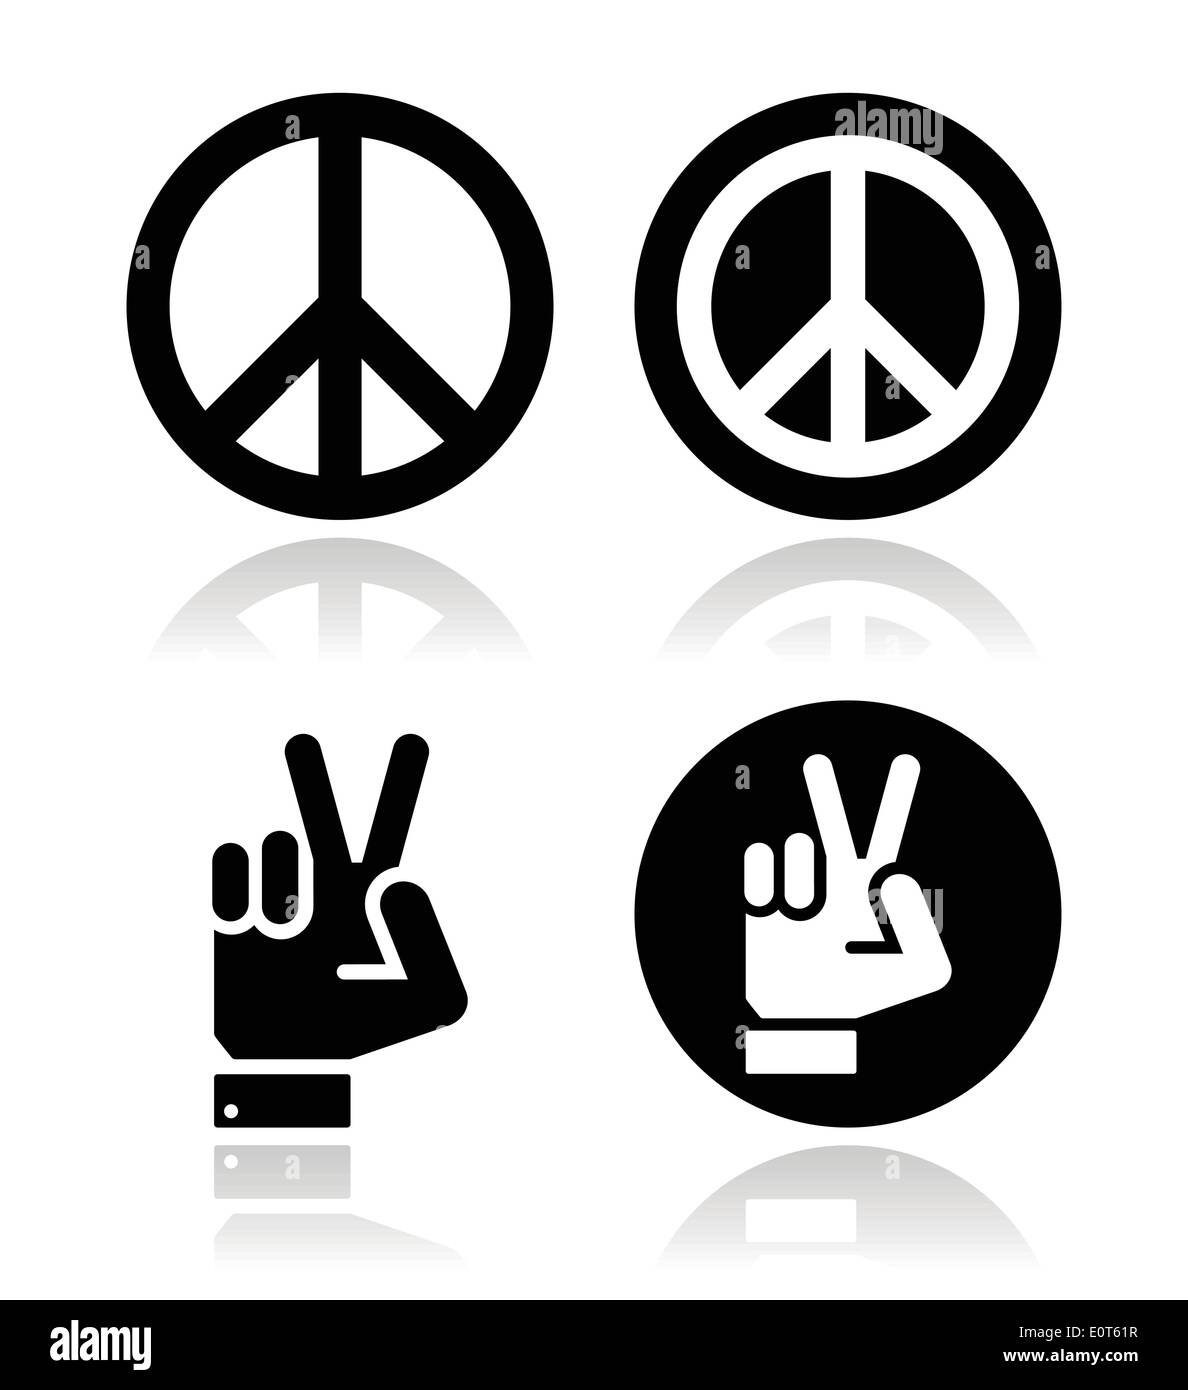 Peace, hand gesture vector icons set Stock Vector